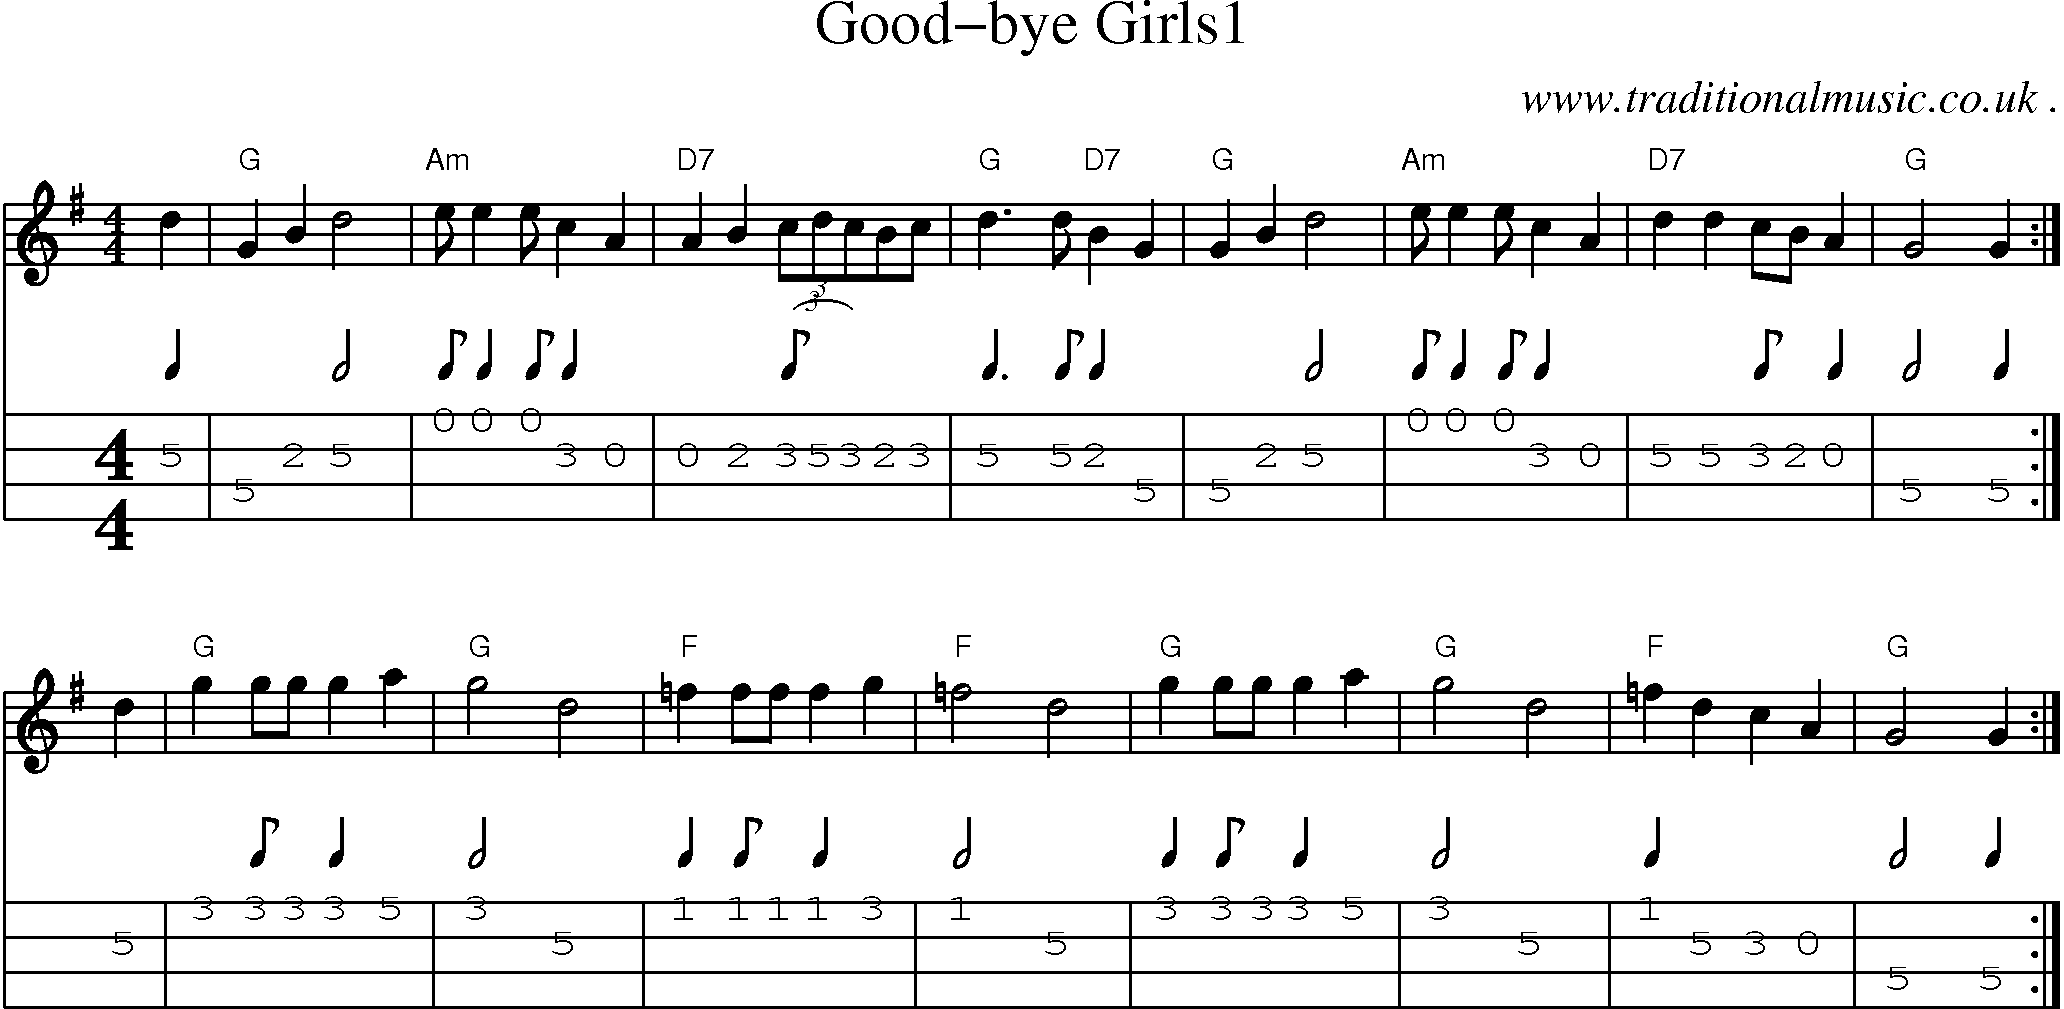 Music Score and Mandolin Tabs for Good-bye Girls1